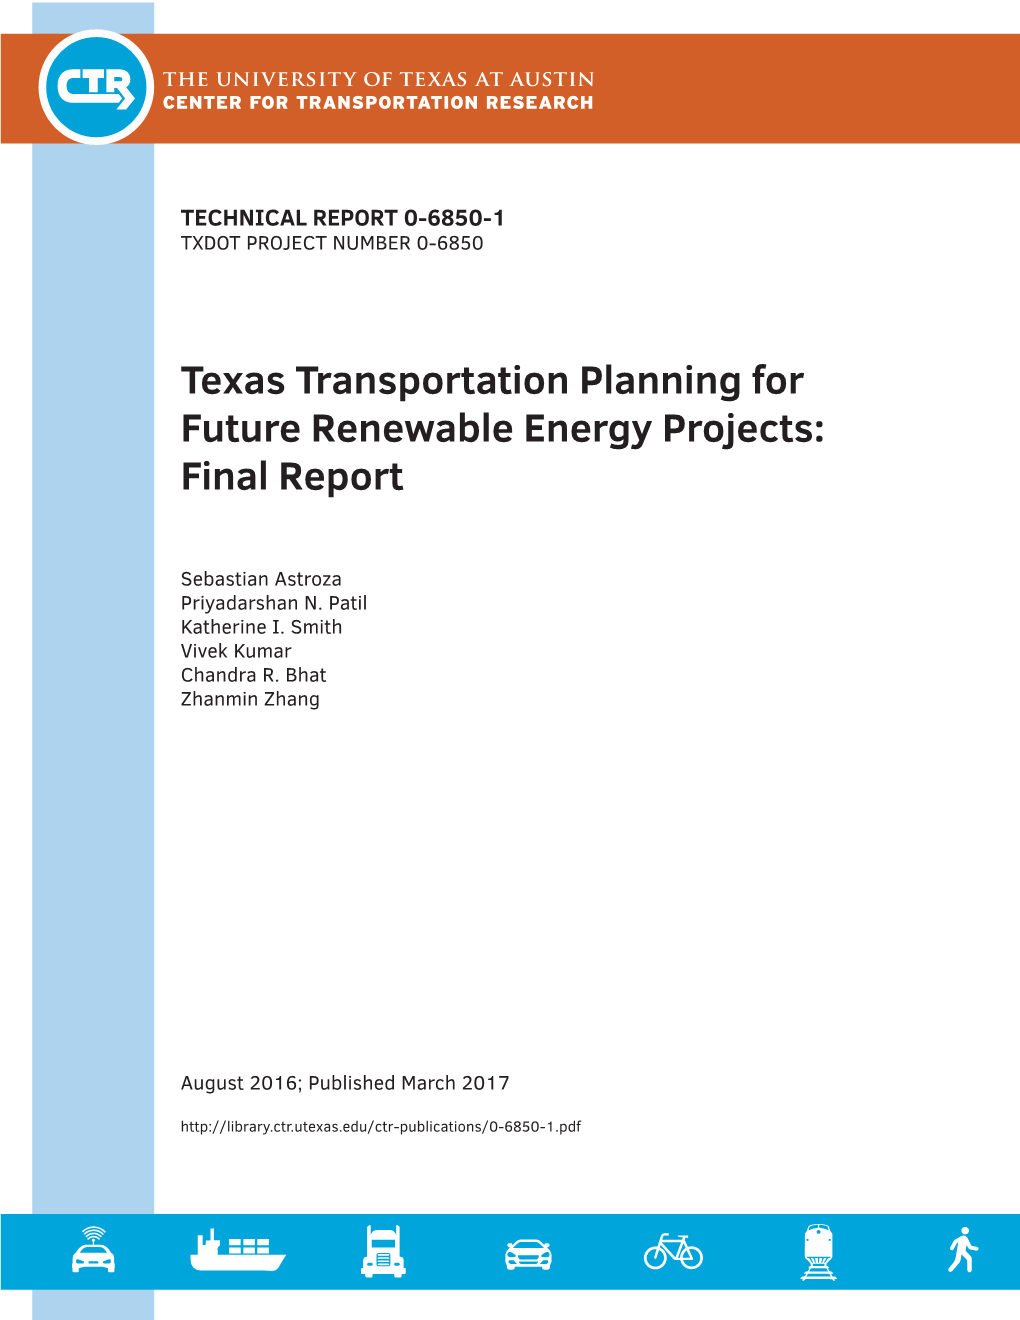 Texas Transportation Planning for Future Renewable Energy Projects: Final Report (FHWA 0-6850-1)